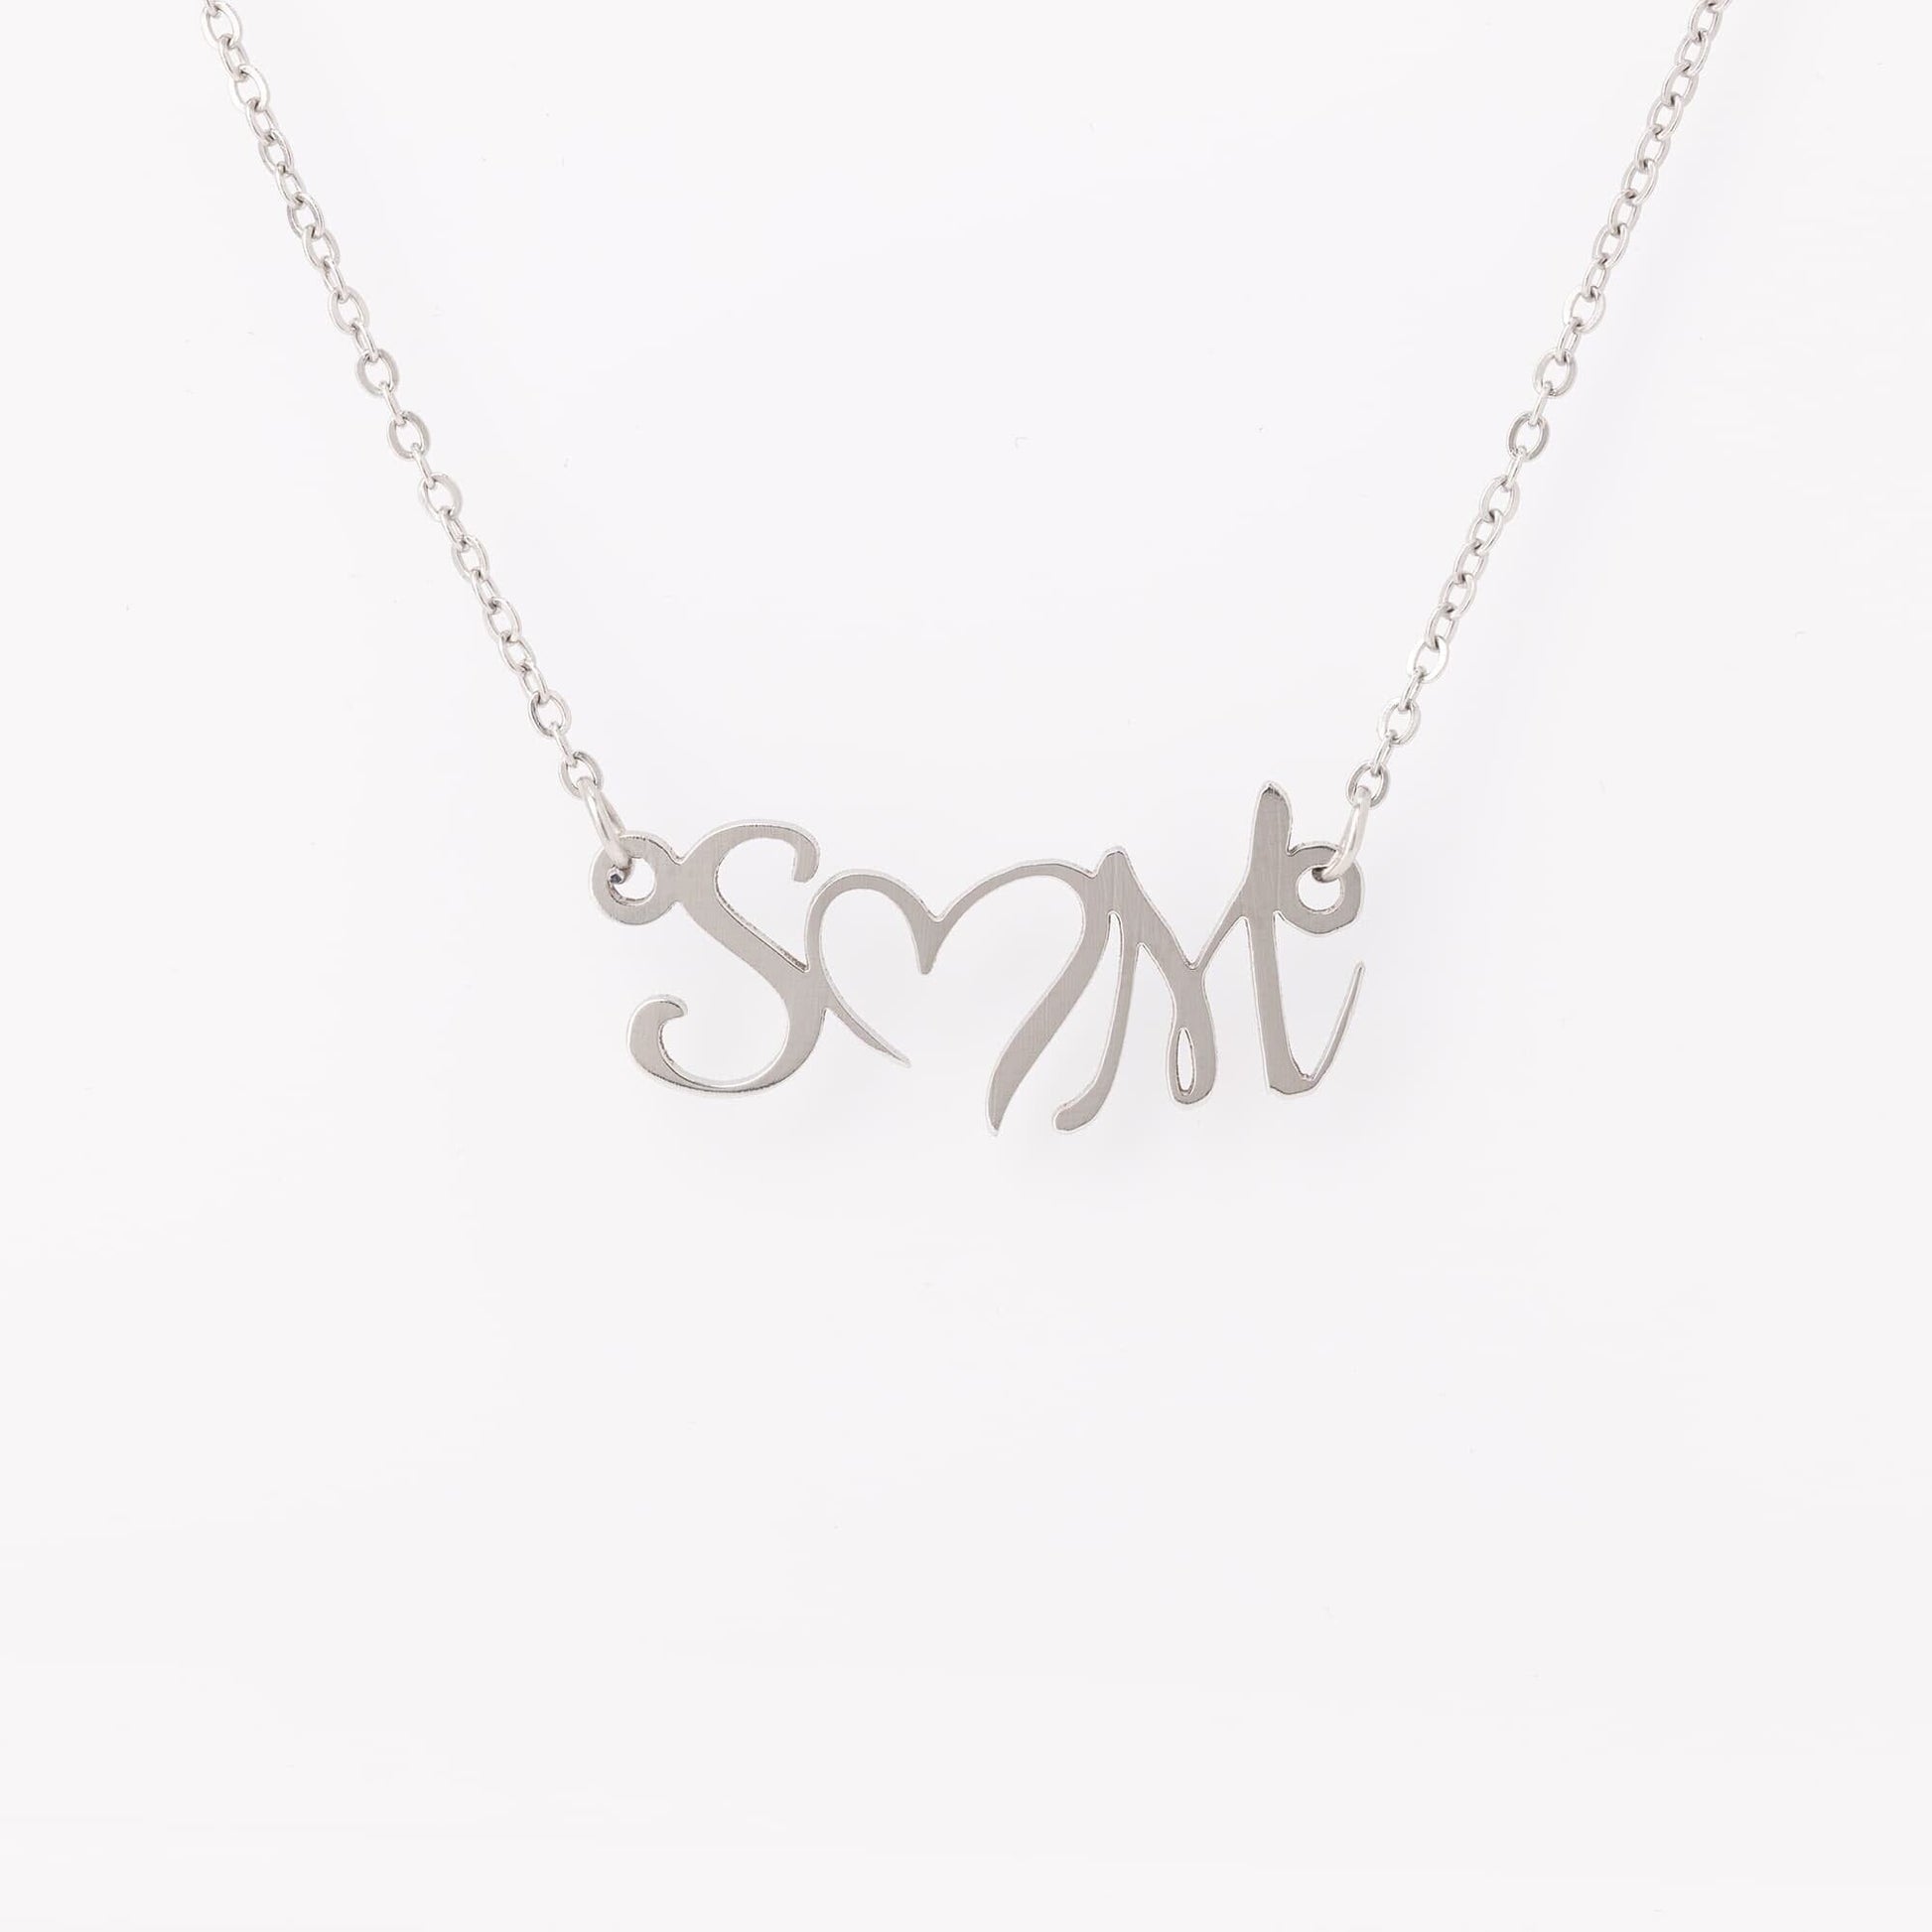 Personalized Heart Necklace With Initials - HGF#227HI Jewelry Silver 